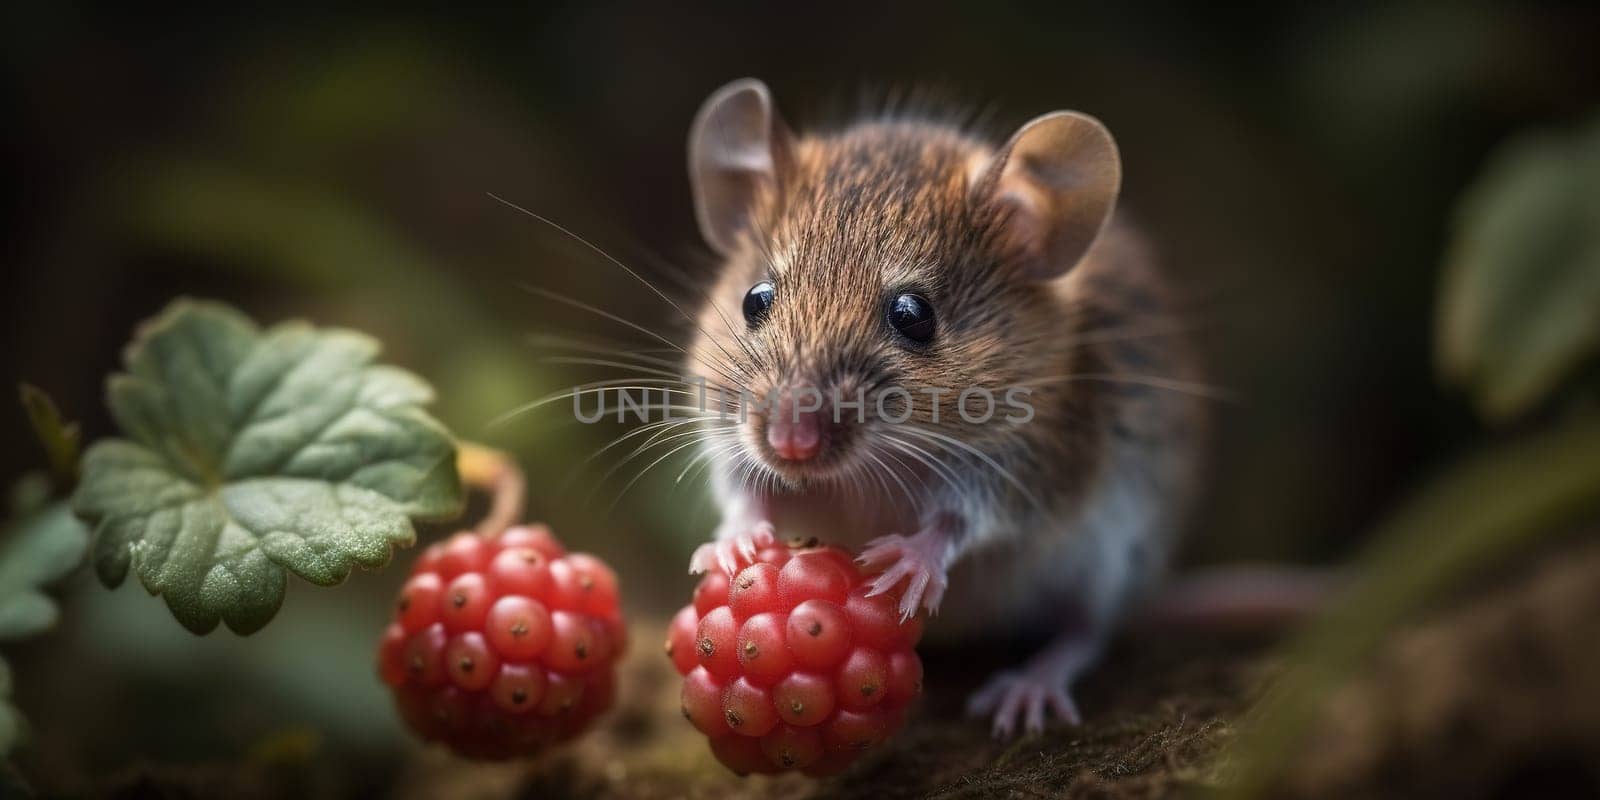 Wild Grey Mouse Eating Raspberry In The Forest by tan4ikk1